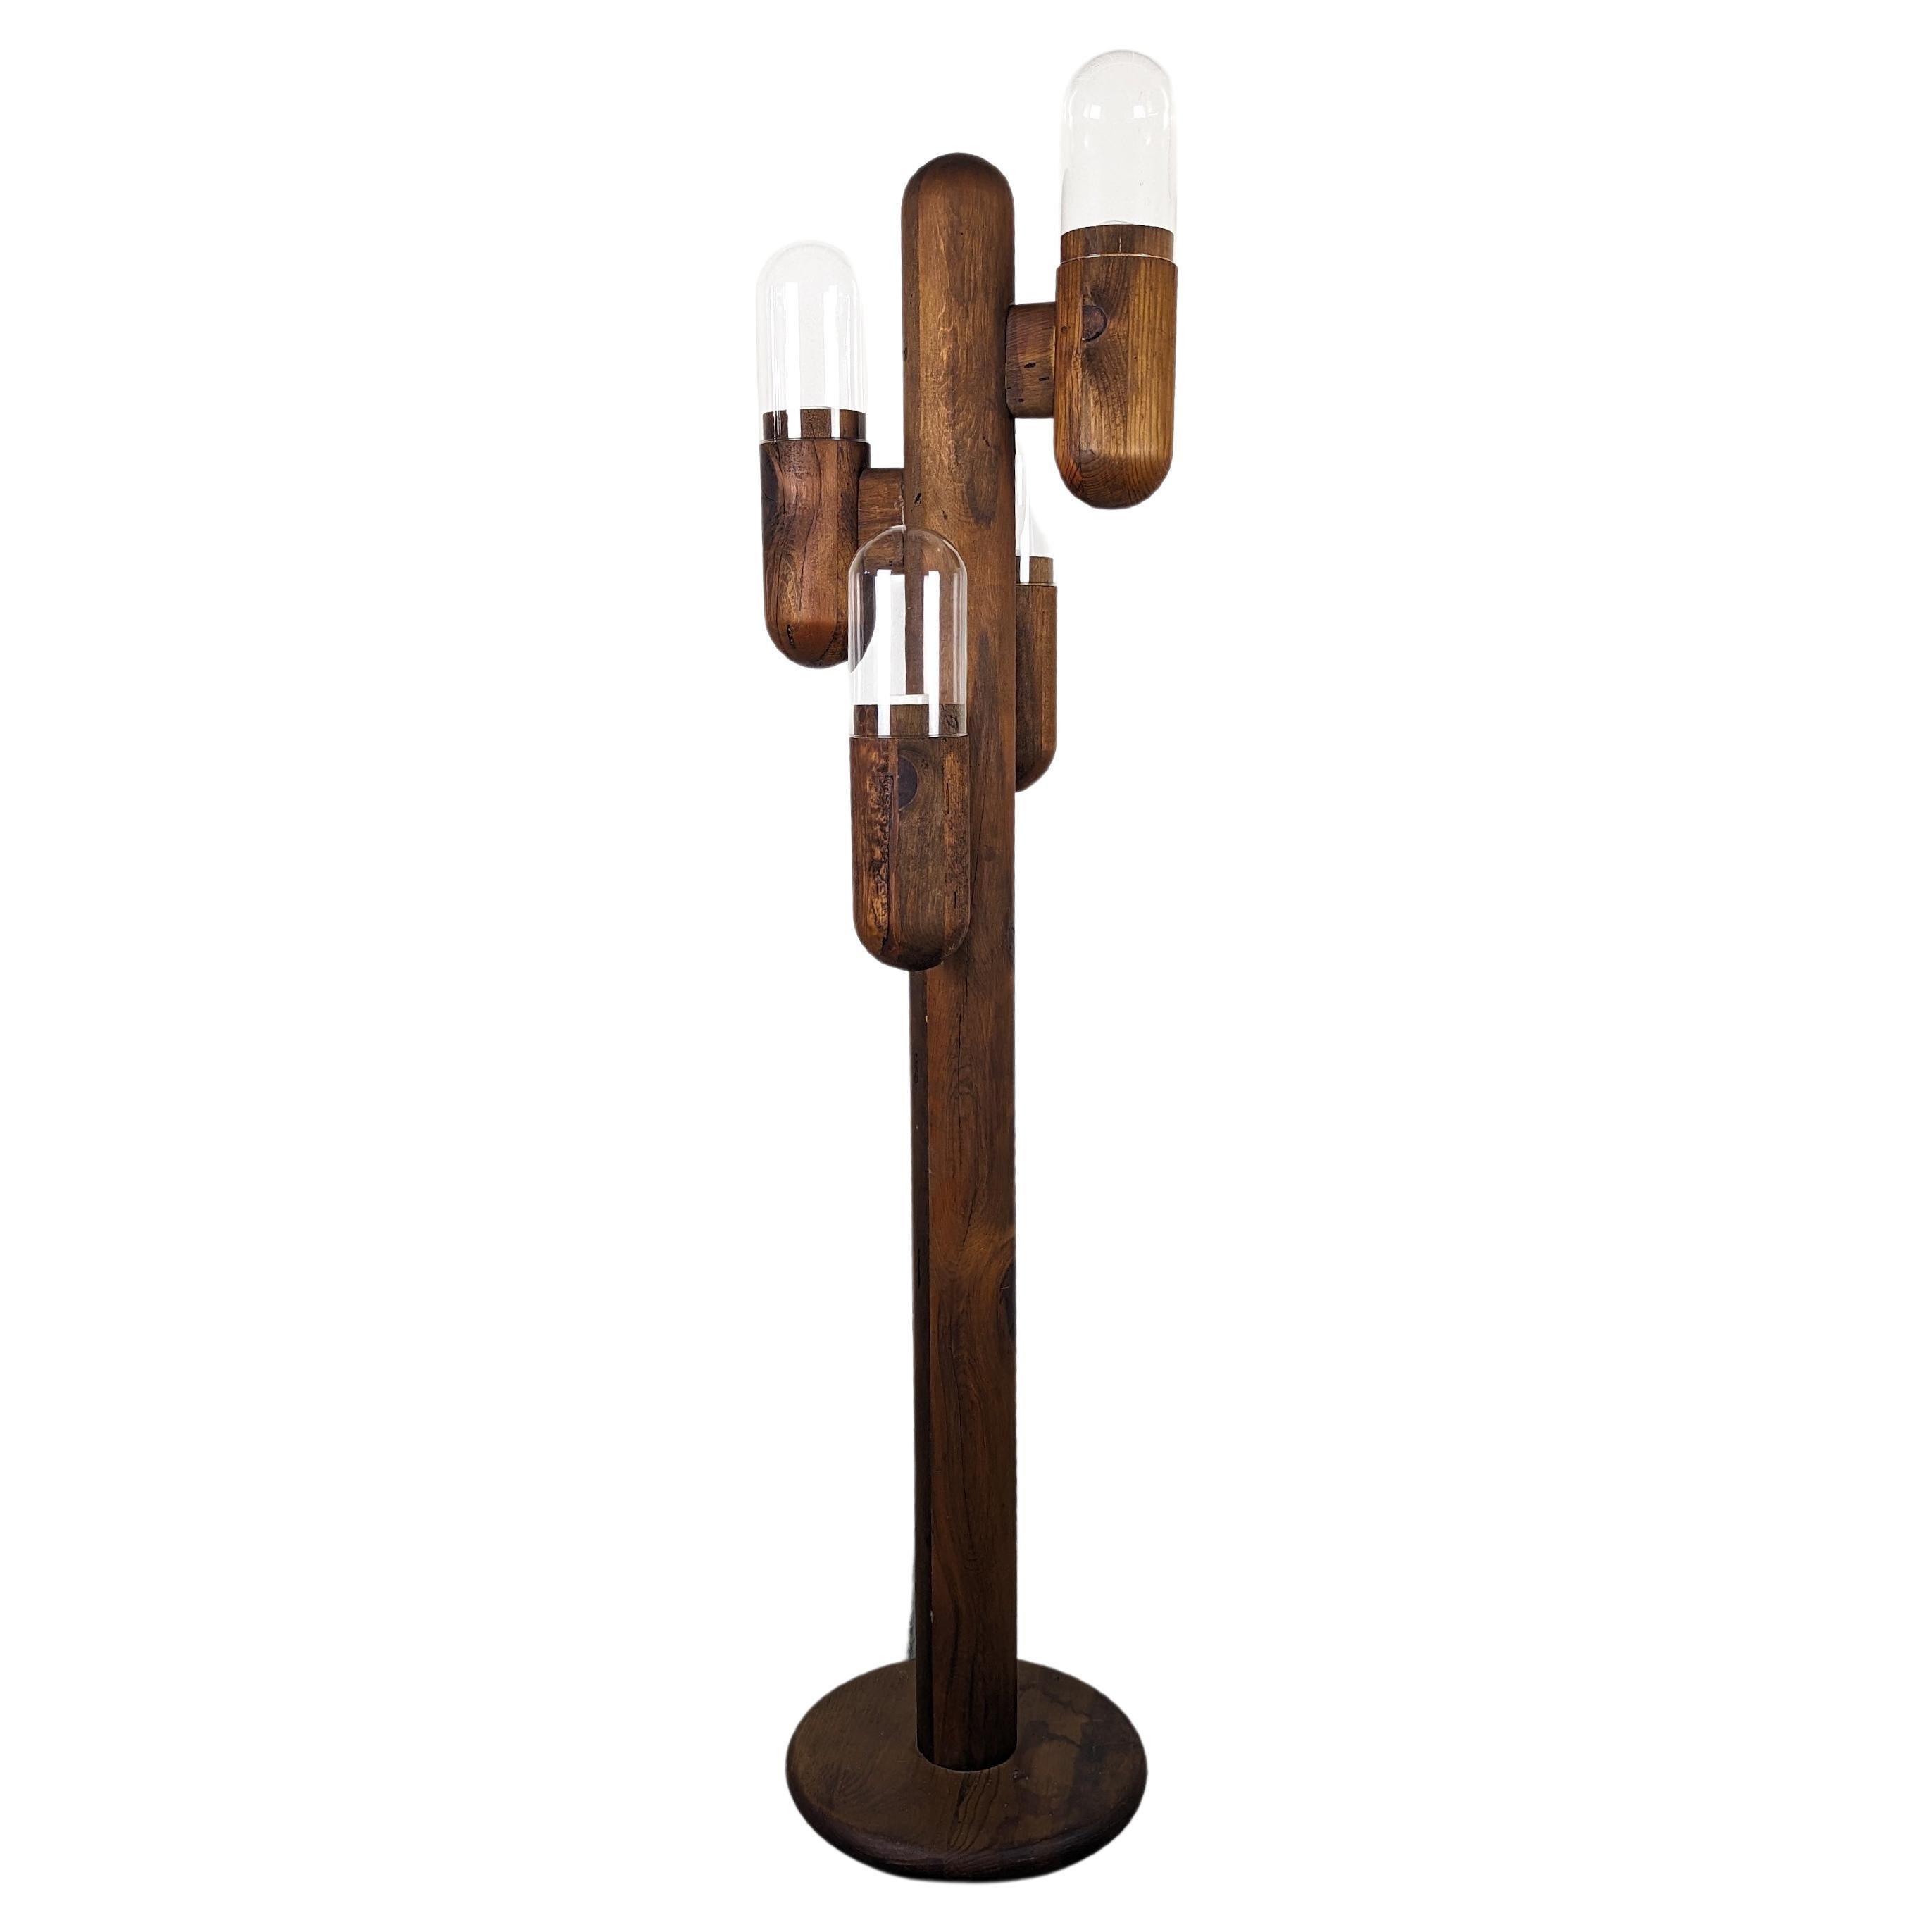 Mid Century Pine Cactus Shaped Floor Lamp by Charles Gibilterra for Modeline of 